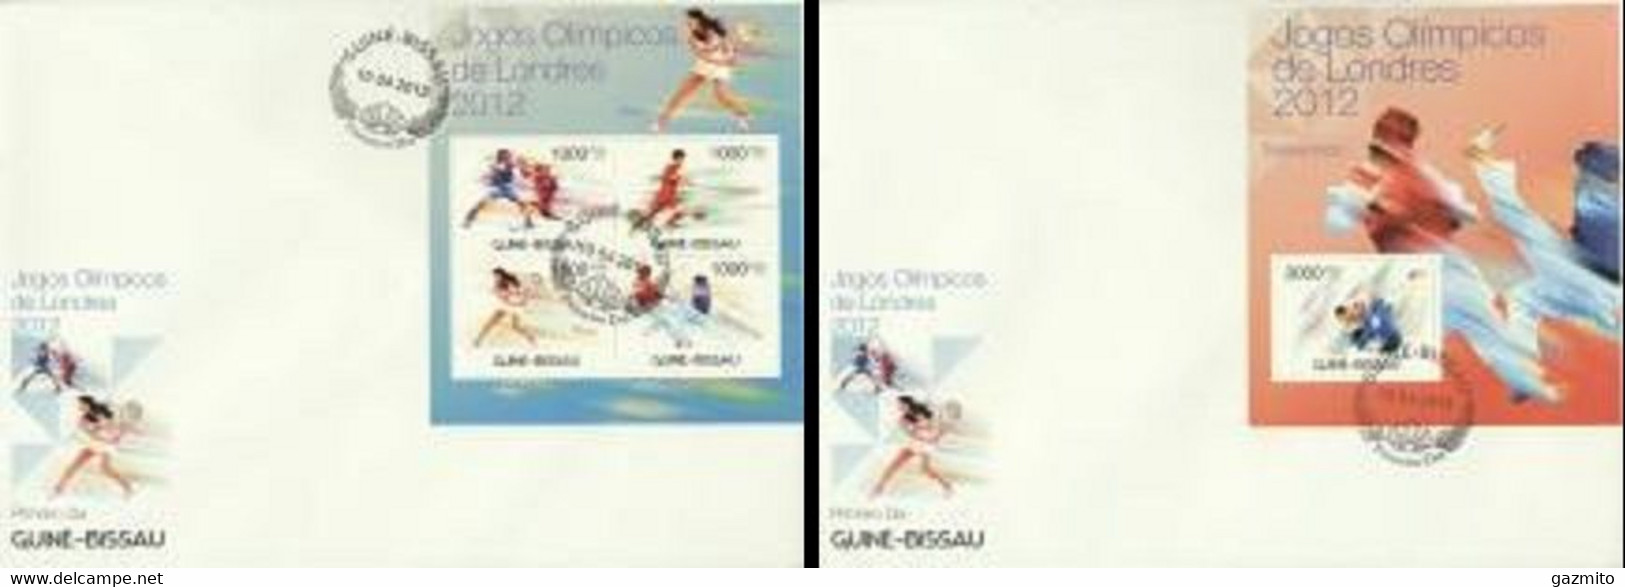 Guinea Bissau 2012, Olympic Games In London, Taekwondo, 4val In BF +BF IMPERFORATED In 2FDC - Unclassified